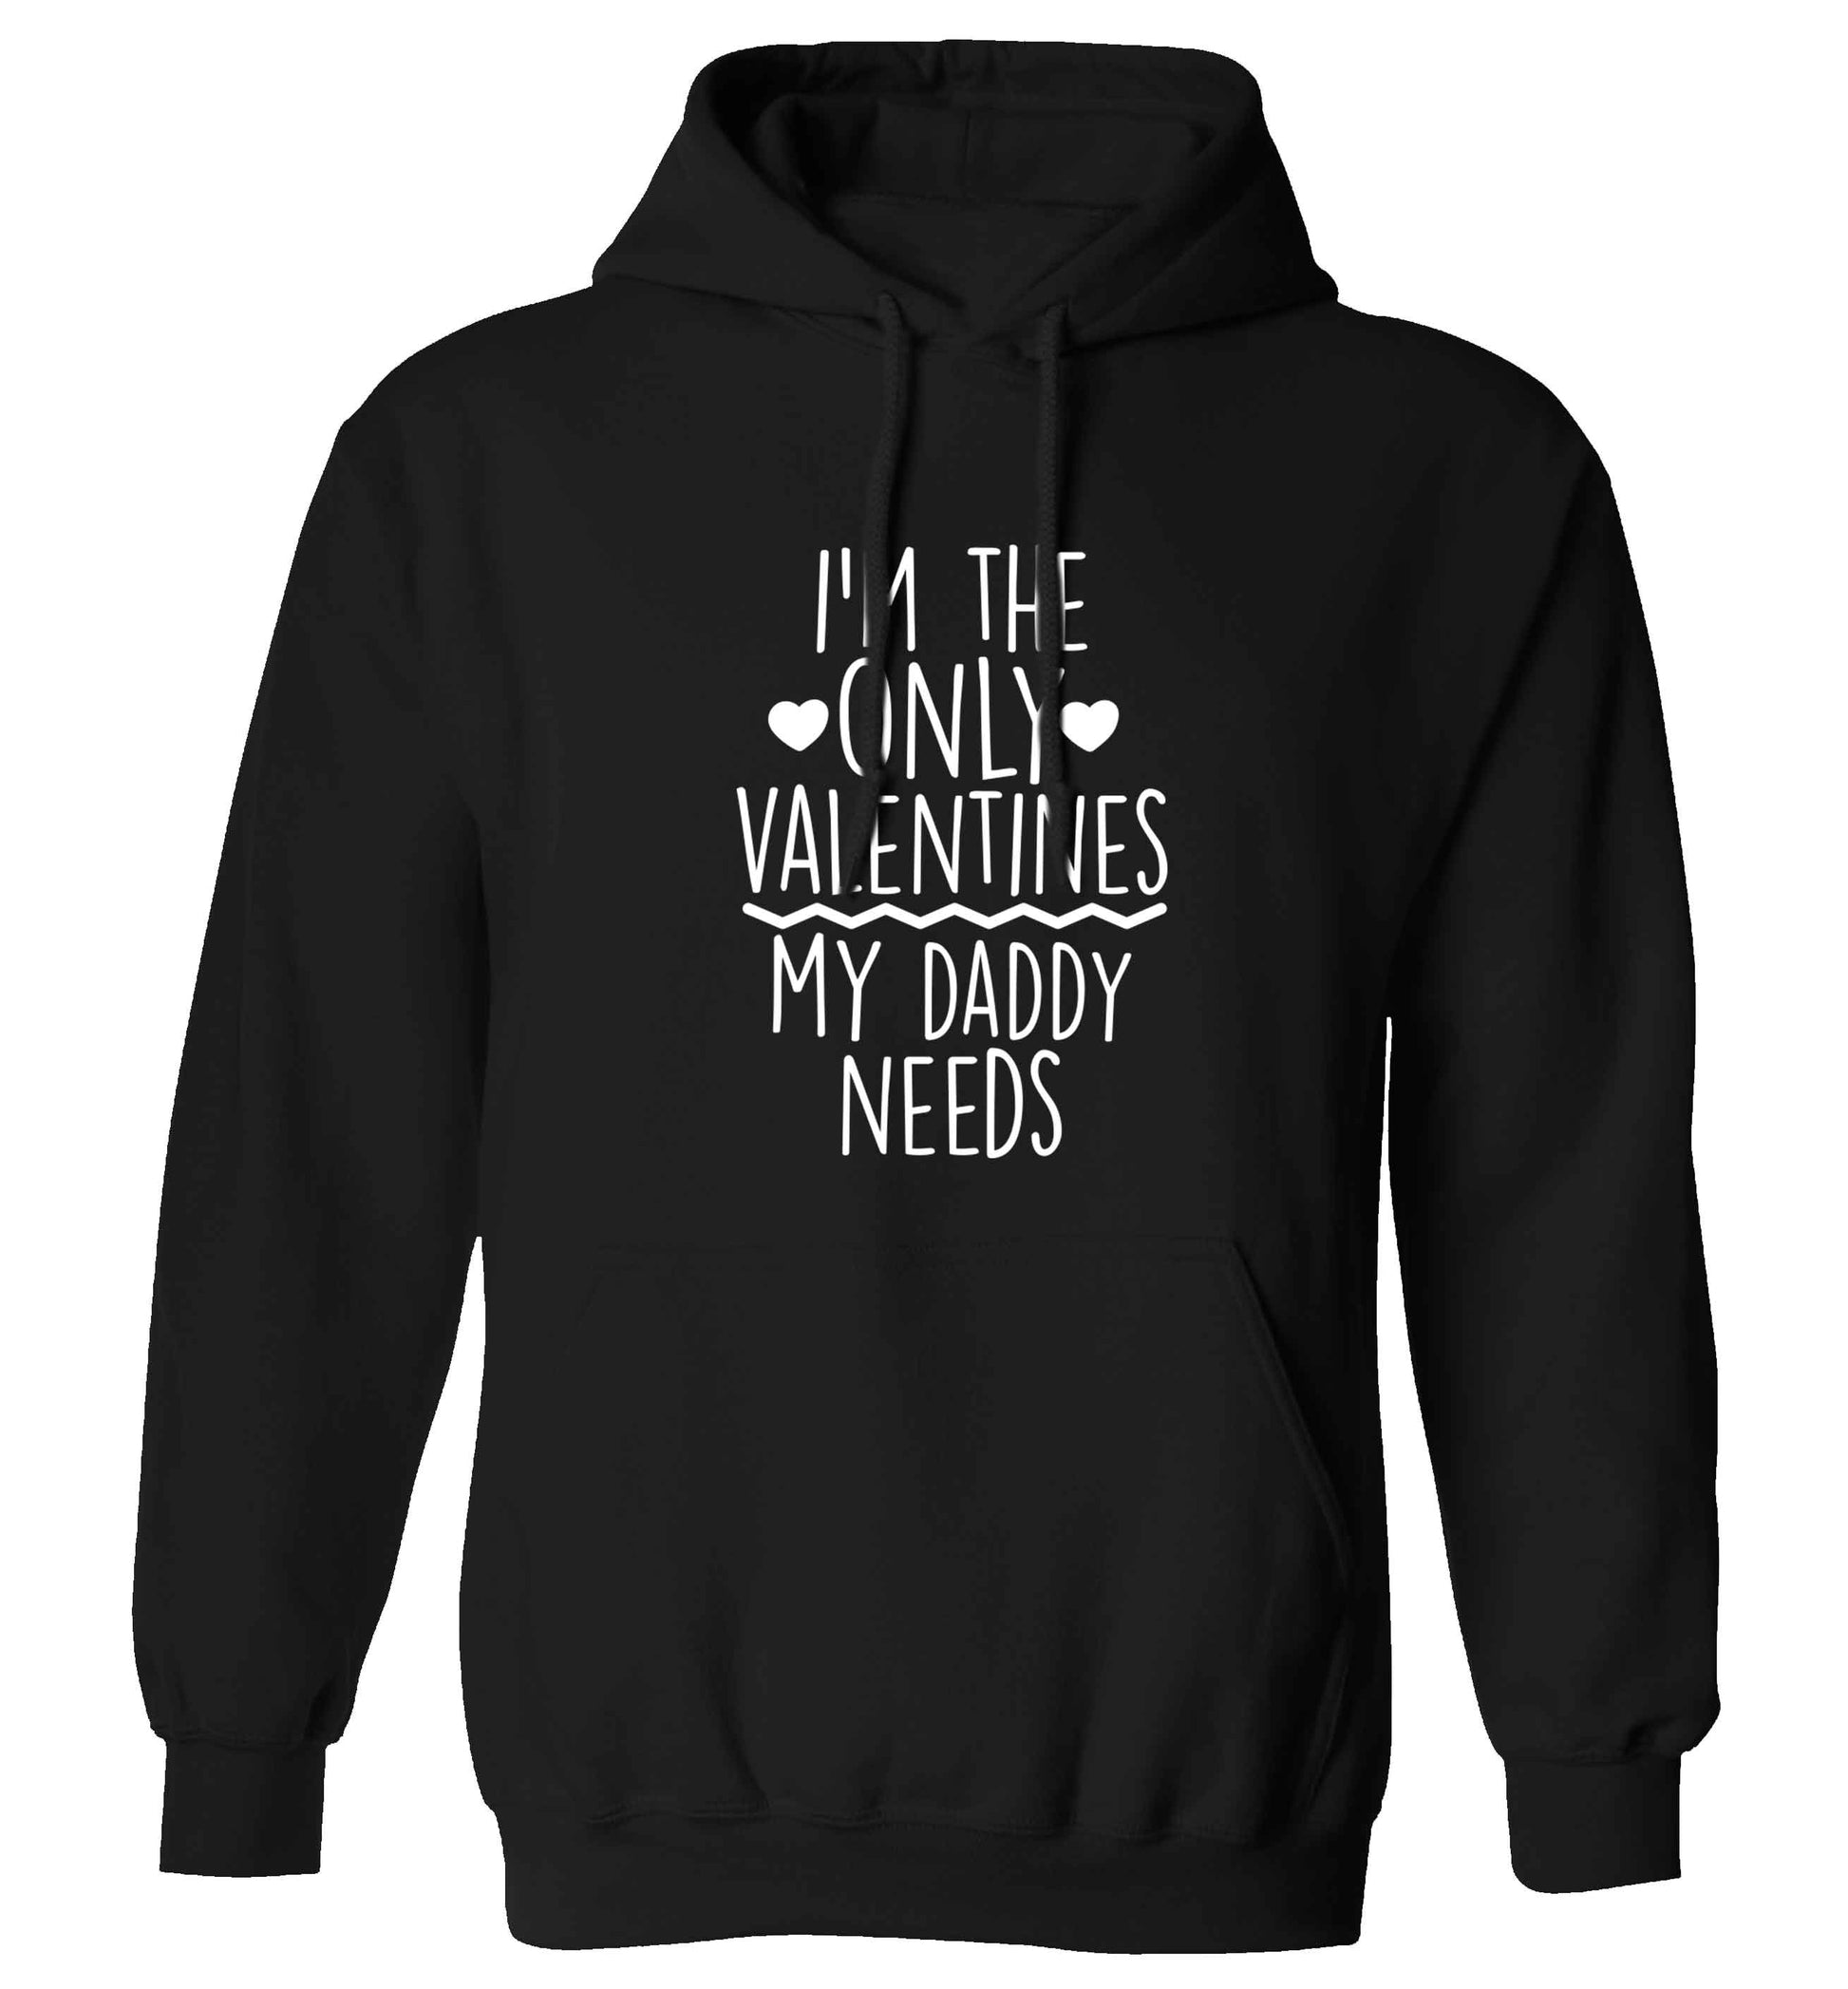 I'm the only valentines my daddy needs adults unisex black hoodie 2XL